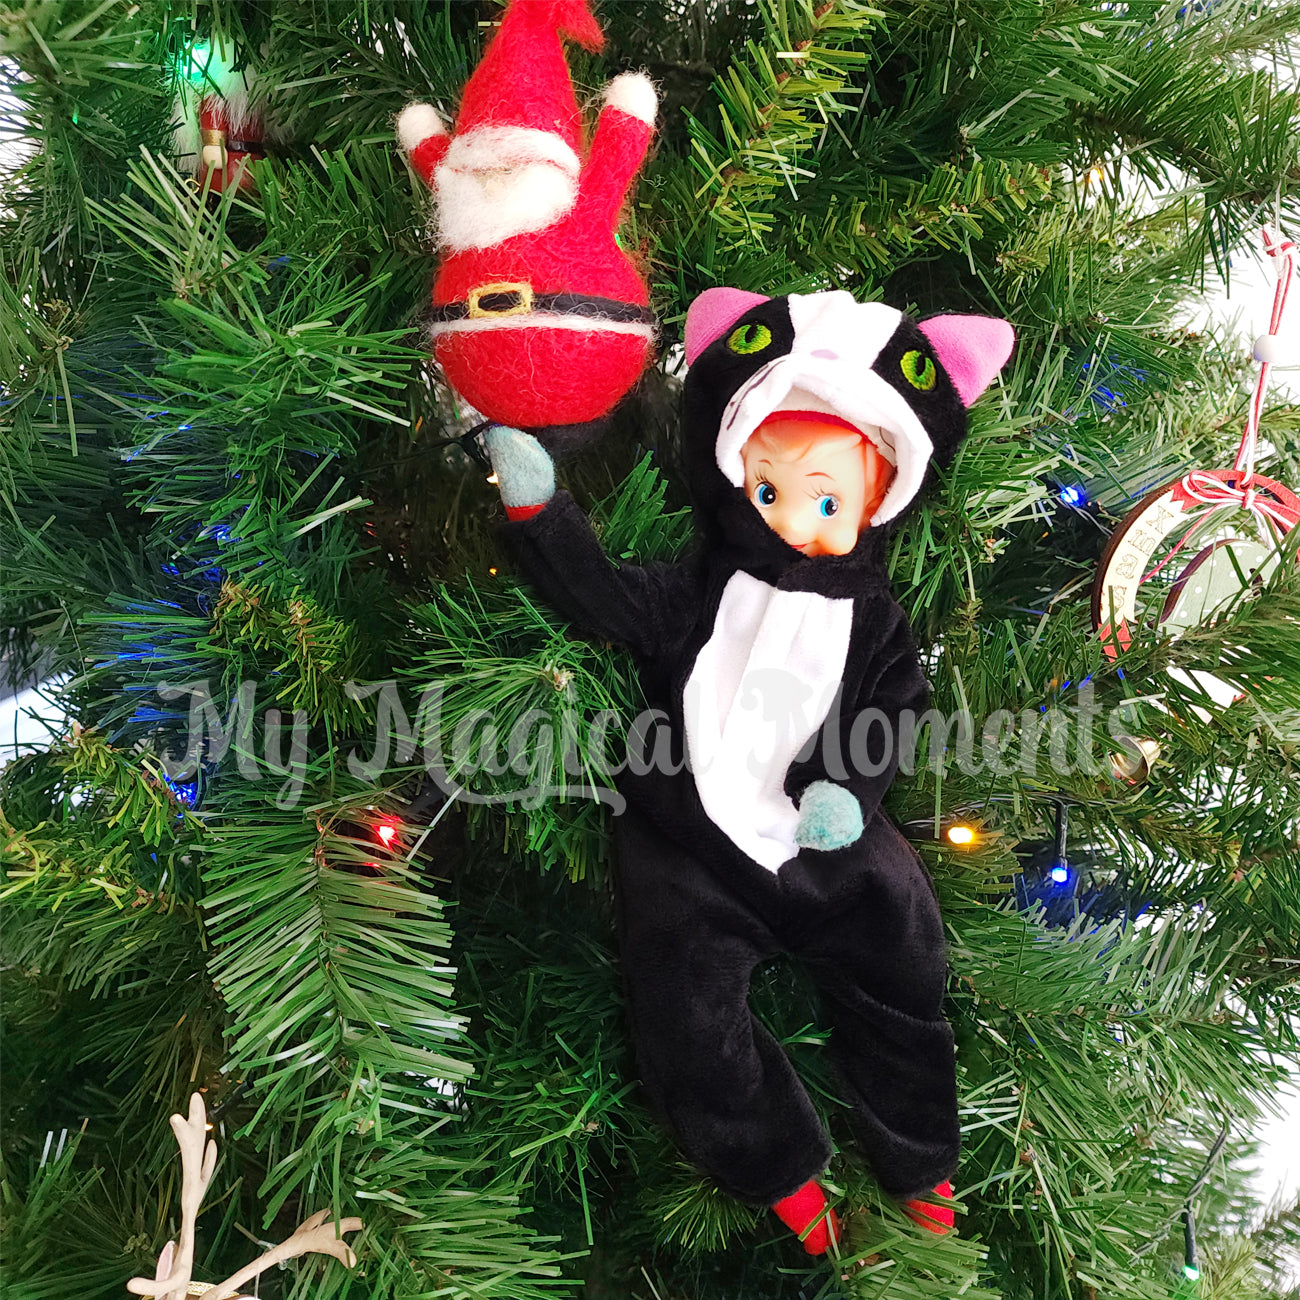 Elf dressed as a cat playing in the Christmas tree